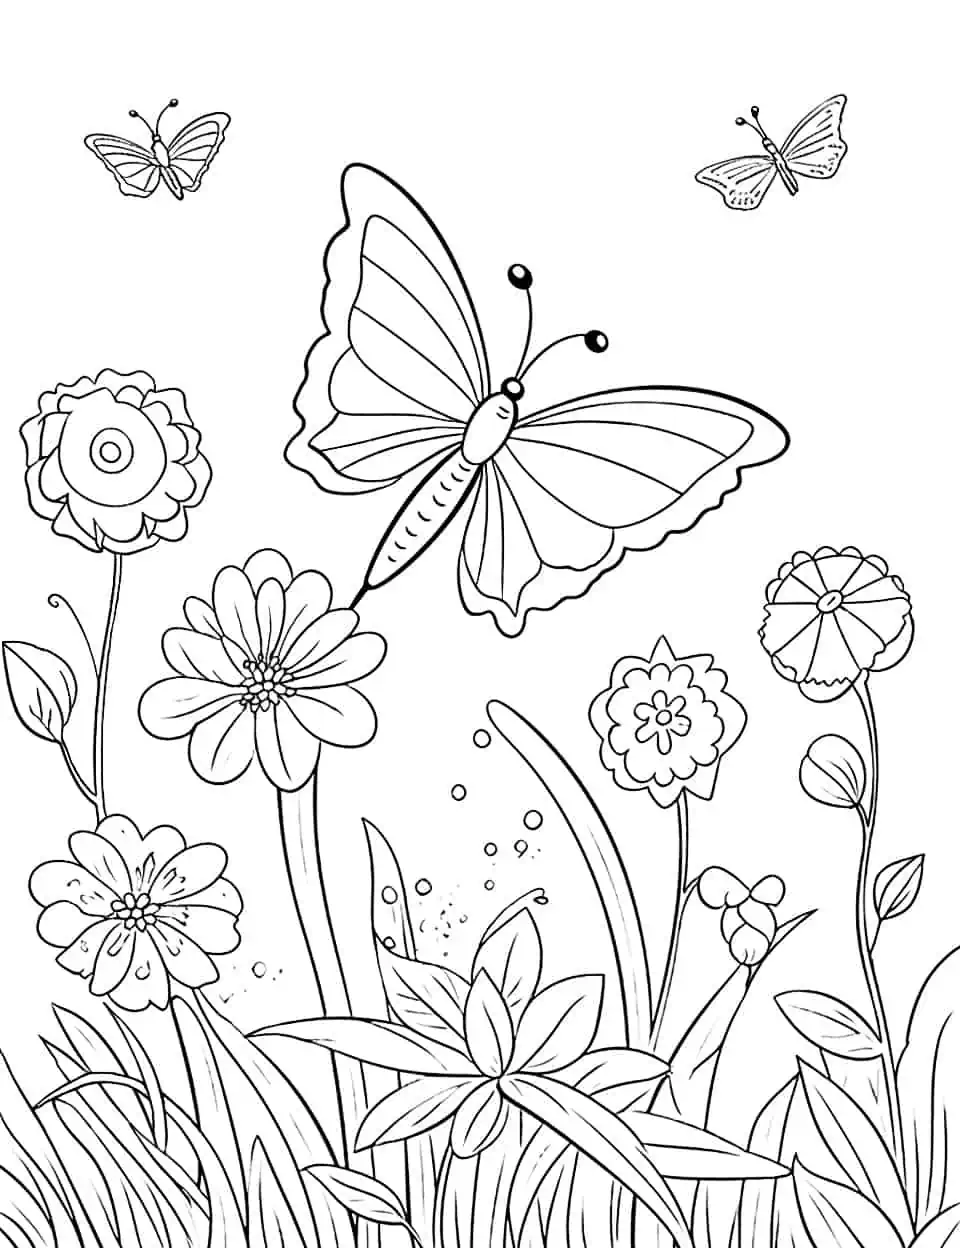 Butterflies Over the Meadow Spring Coloring Page - A page filled with detailed butterflies flying over spring flowers, perfect for kindergarten children.